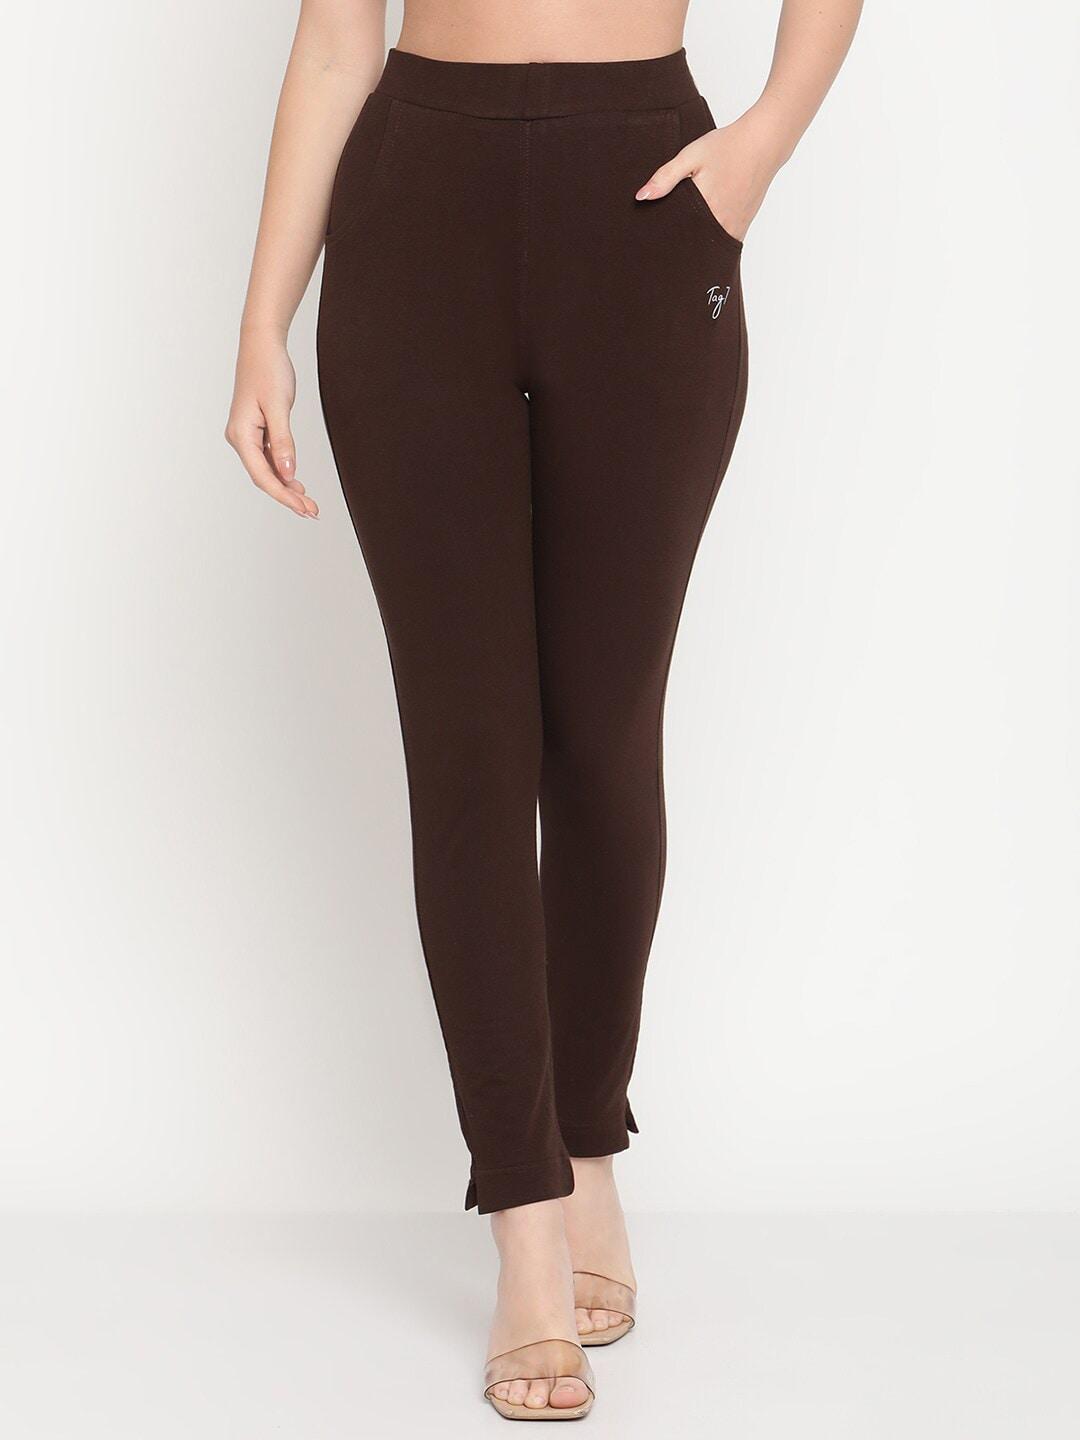 TAG 7 Women Brown Solid Ankle Length Jeggings